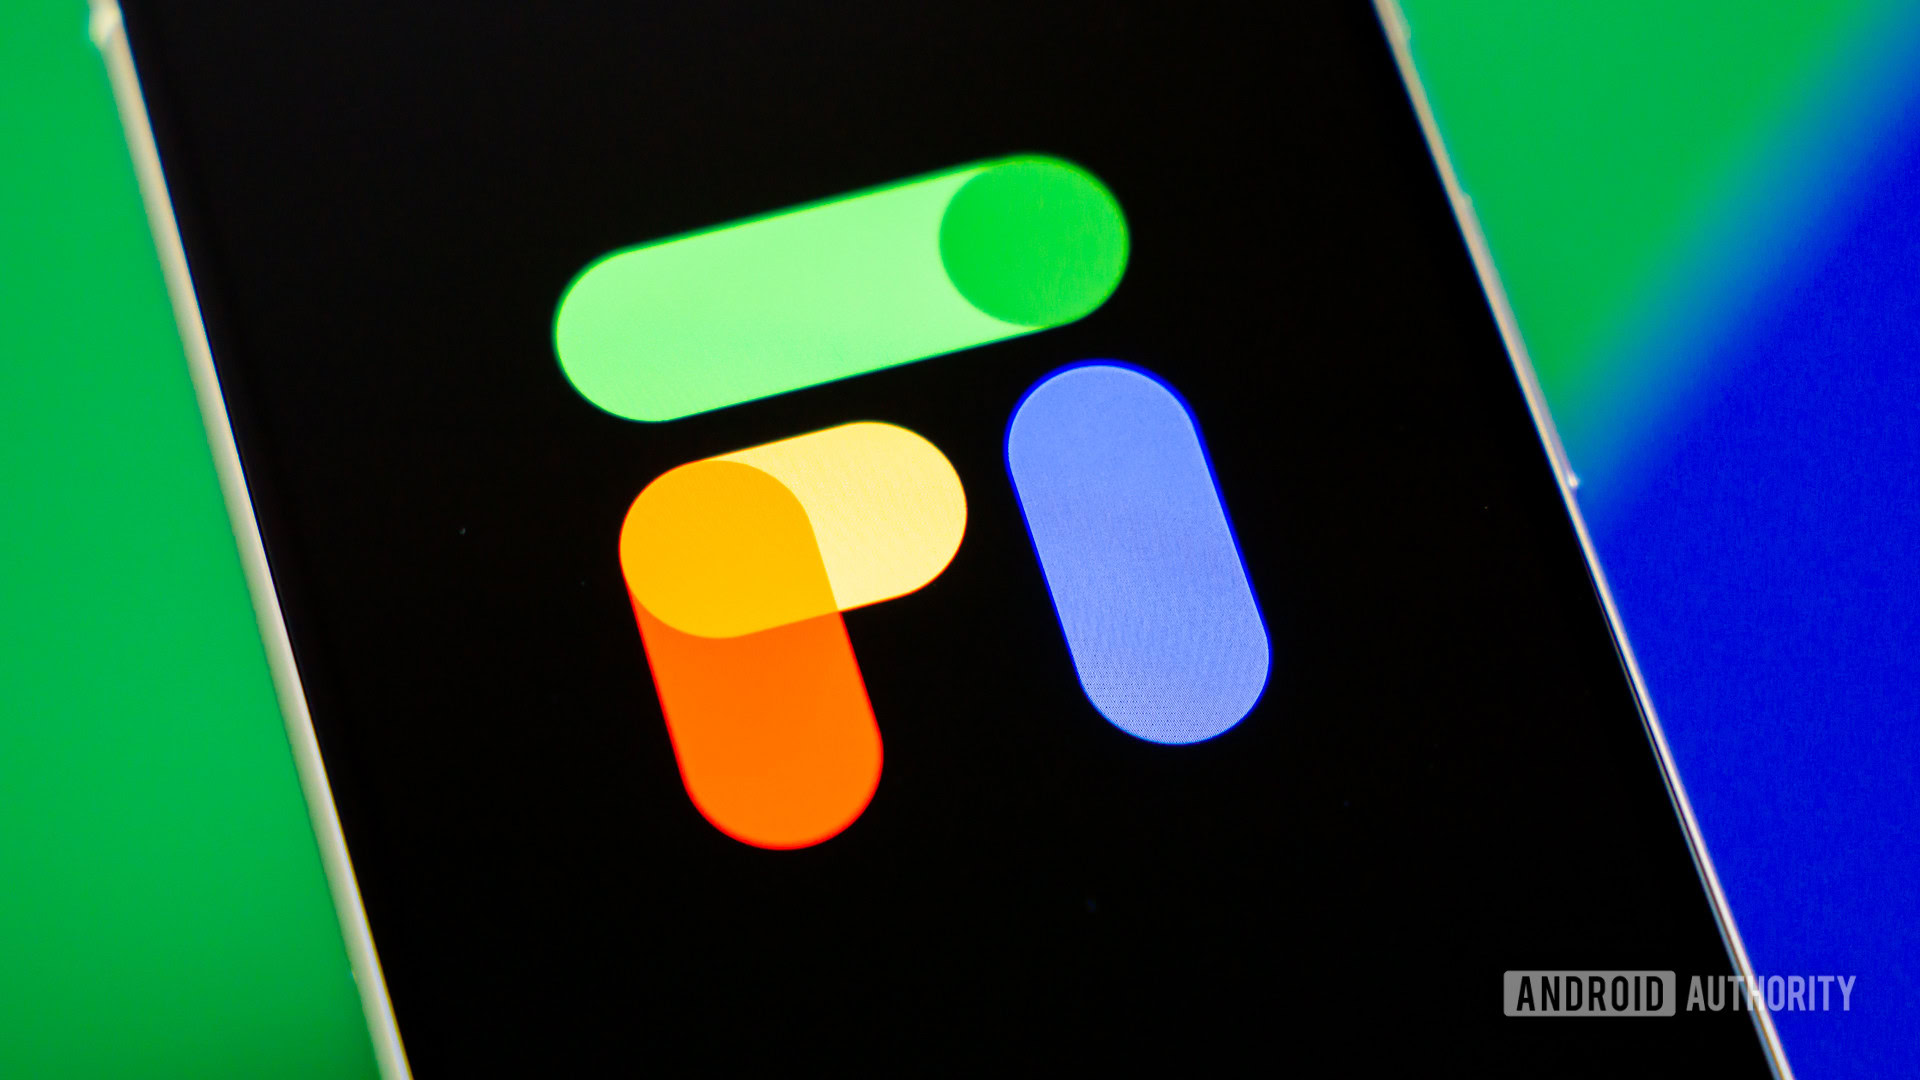 Stock photo of Google Fi logo on phone with colorful background 2